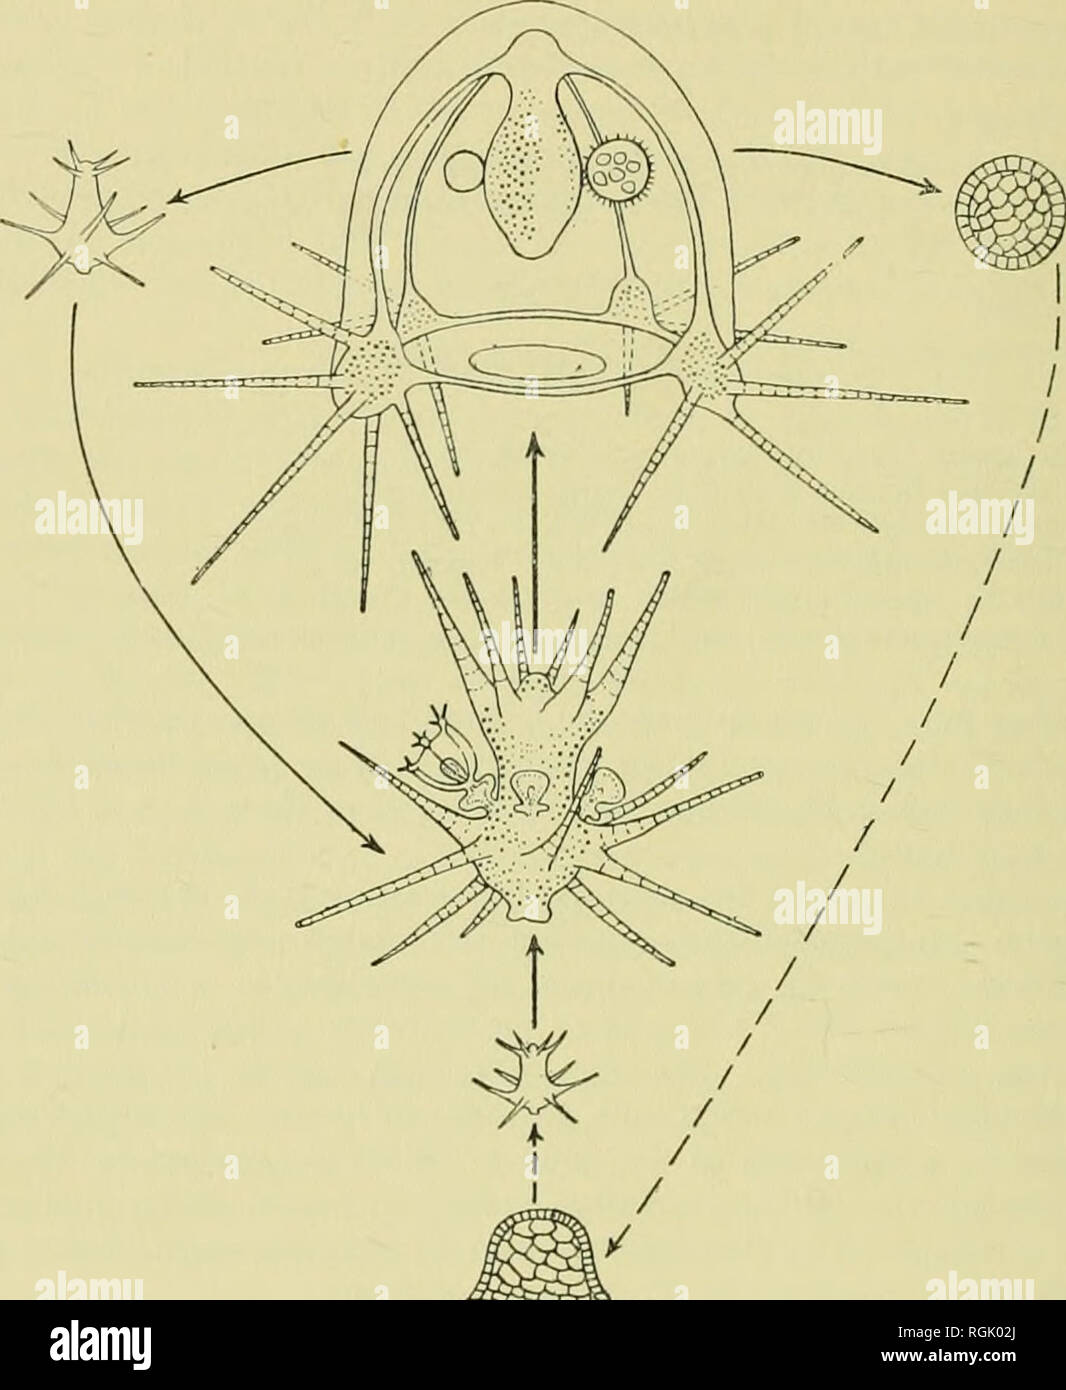 . Bulletin of the British Museum (Natural History). 82 EVOLUTIONARY TRENDS IN CAPITATE HYDROIDS AND MEDUSAE Margelopsis haeckeli are larger than the summer eggs (Werner, 1955). Unhke the ^ latter, they do not develop immediately into young hydranths, but form plano- convex cysts on the substratum and persist in this condition throughout the %vinter, giving rise in the spring to young pelagic hydranths (Text-fig. 31). This explains. iiiiNiiiifjfiiiBiiiMiiiiiimiiiiiii Fig. 31. The life cycle of Margelopsis haeckeli Hartlaub : summer eggs are small and develop into actinulae while the larger autu Stock Photo